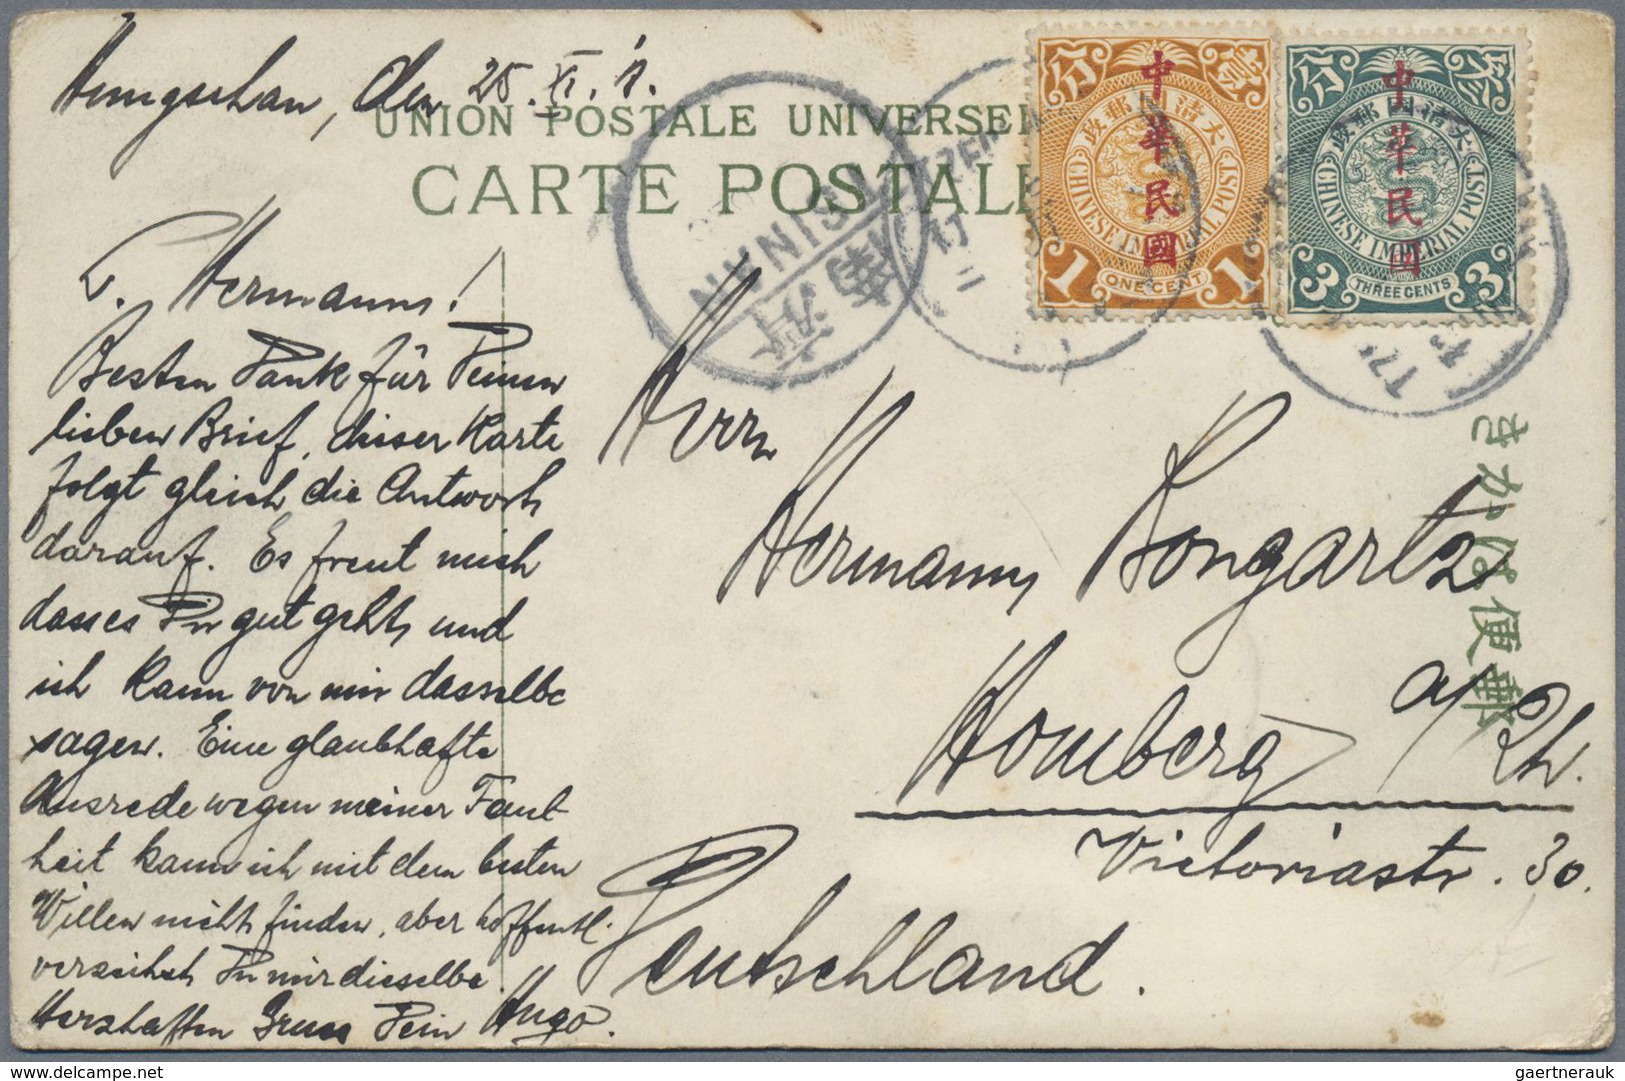 Br/ China: 1898/1912, coiling dragons on covers (5), ppc (5) used to Germany or China inland; also 1912